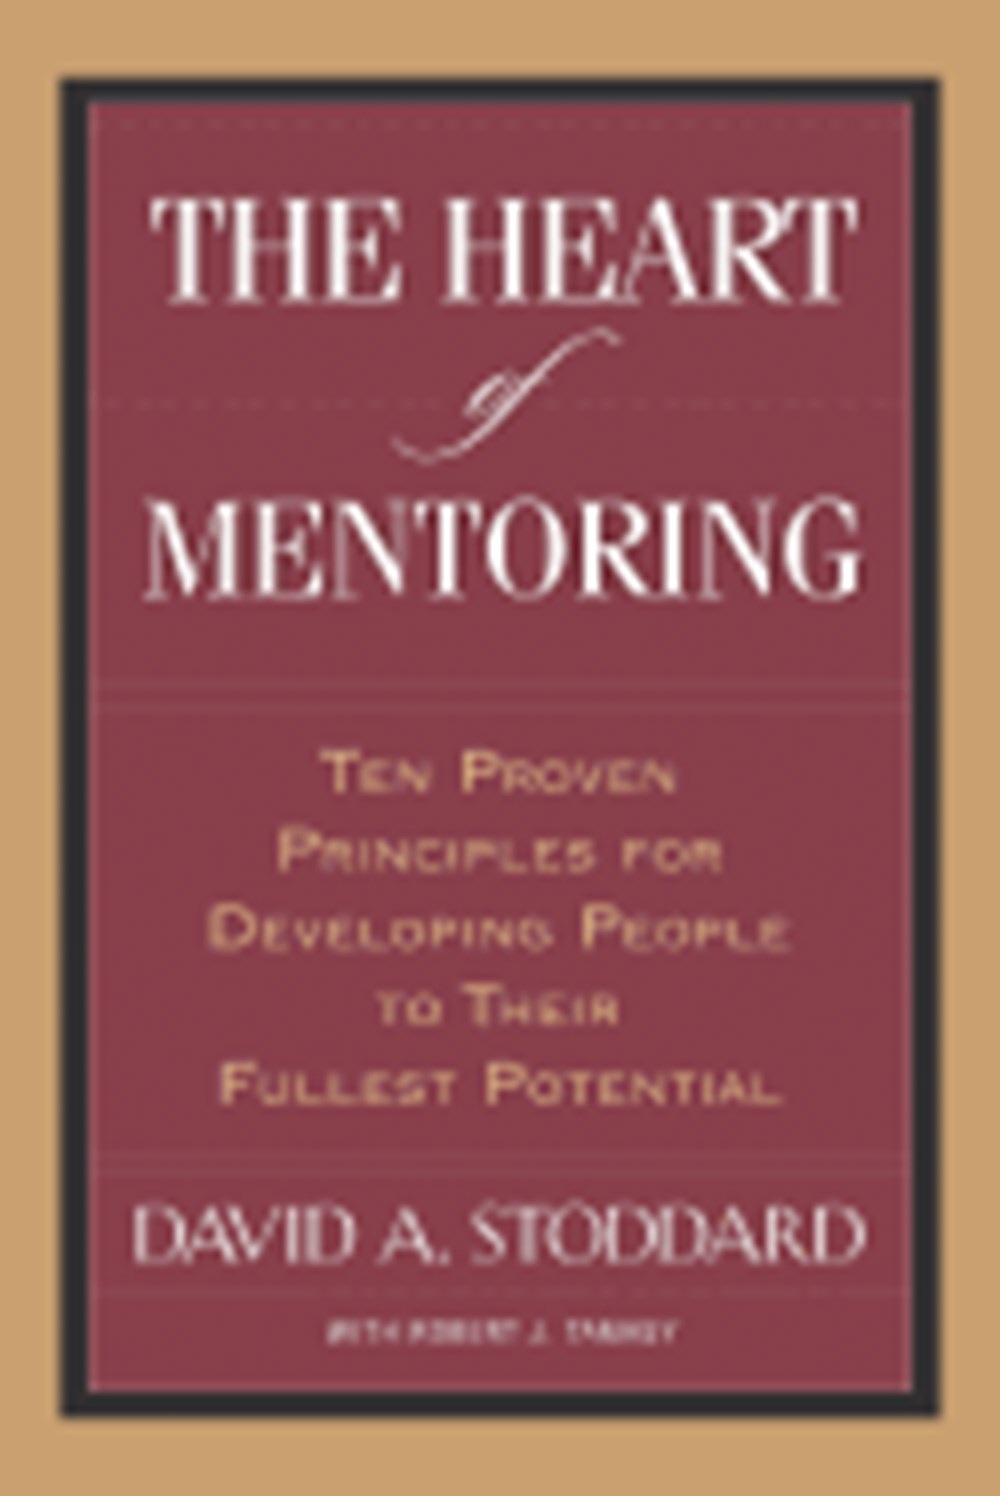 Heart of Mentoring: Ten Proven Principles for Developing People to Their Fullest Potential